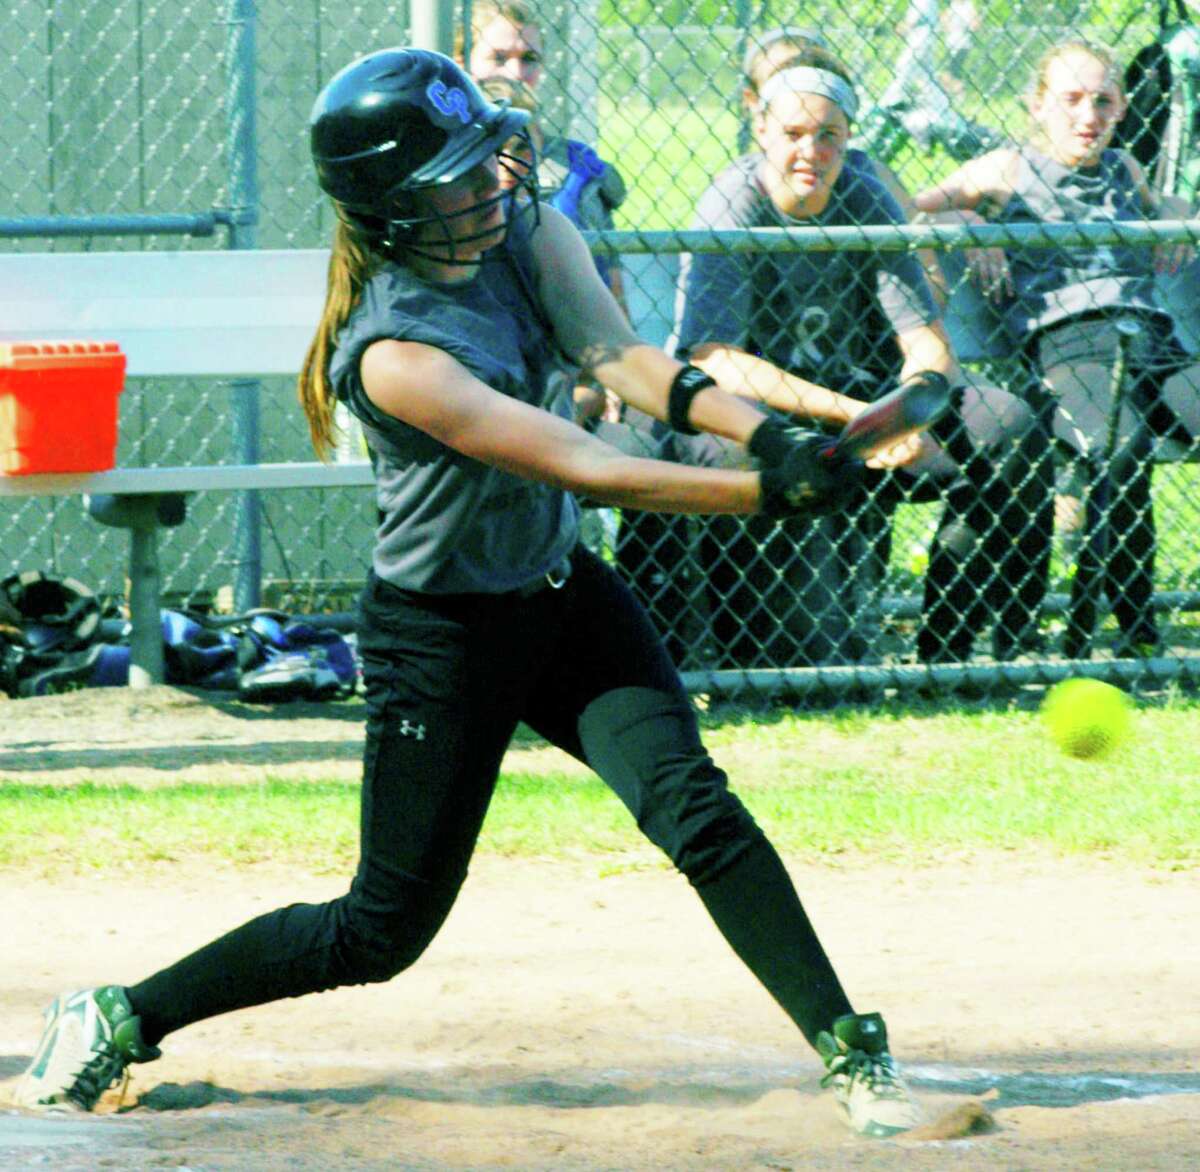 Caitlin Farrell of the Green Wave rips a hard grounder during New Milford High School softball's game vs. Pomperaug, May 11, 2015 at NMHS.